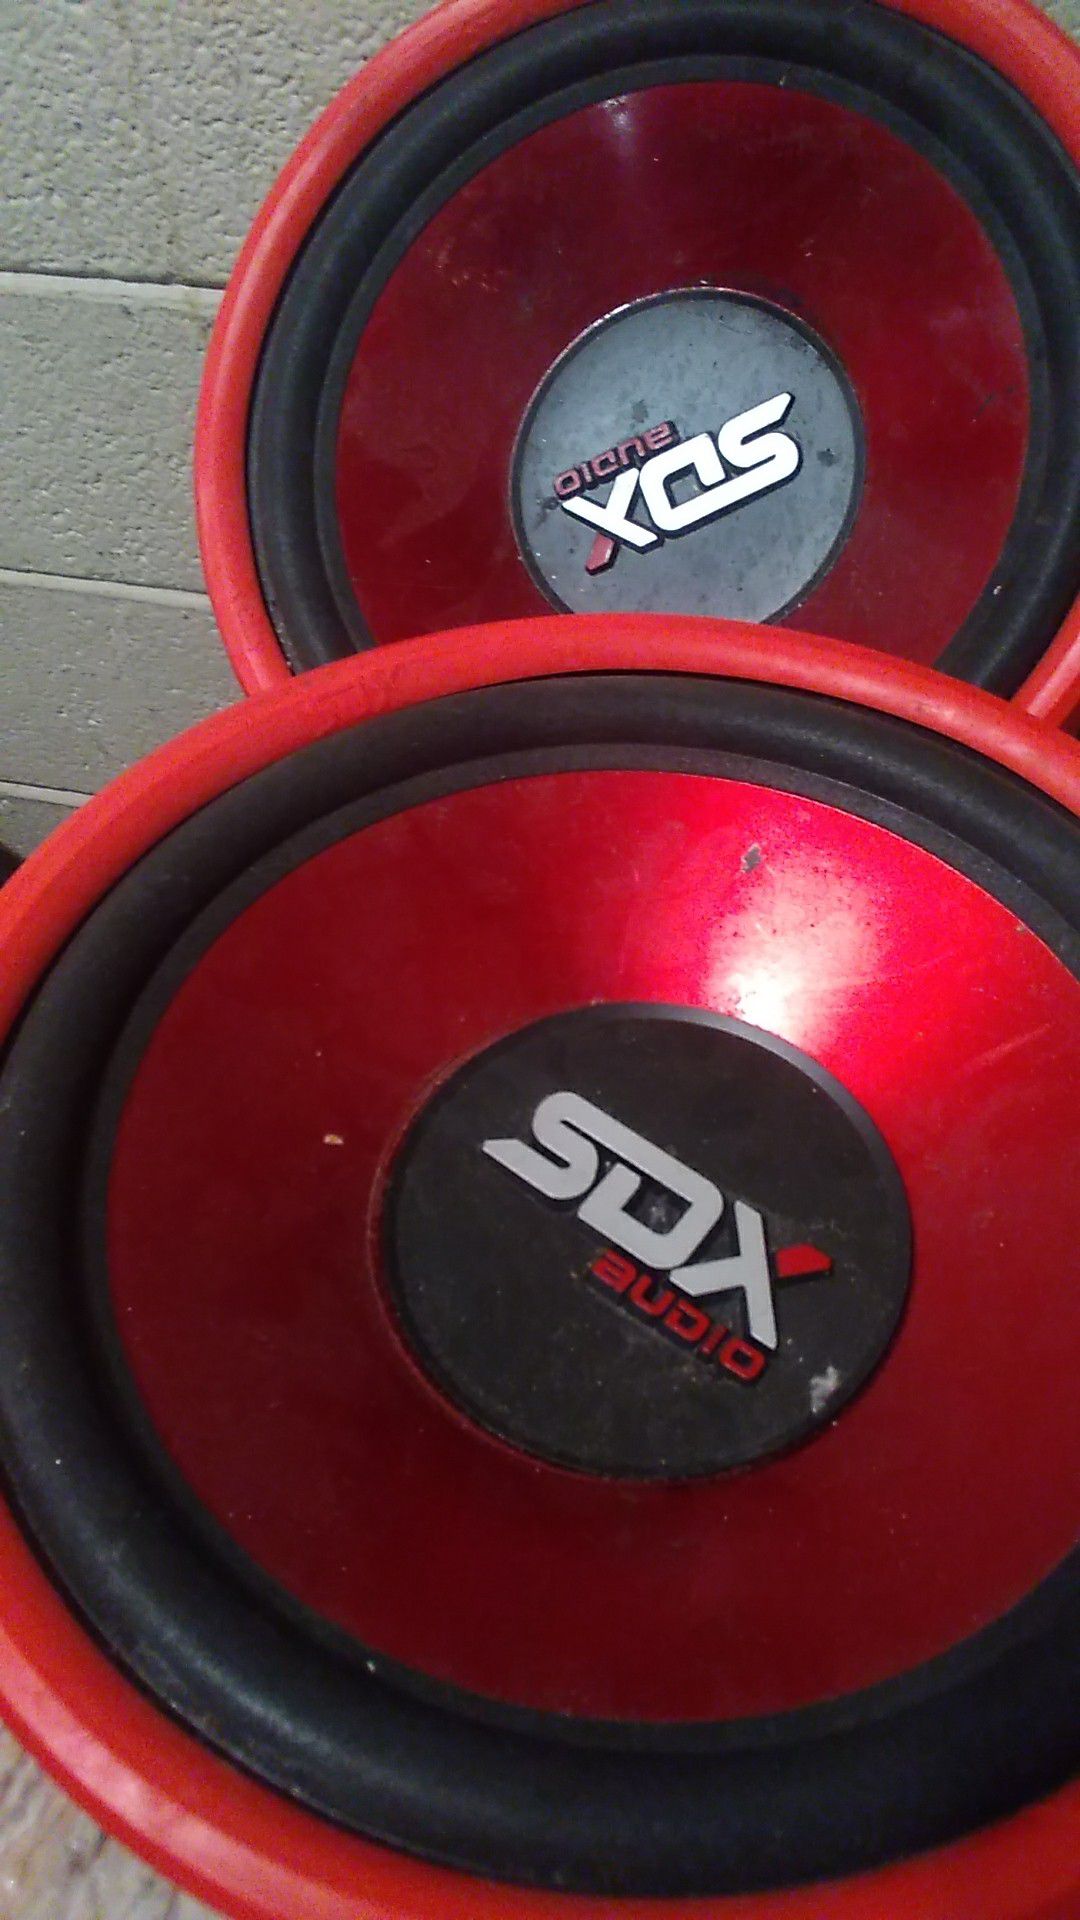 Sdx Audio Pair Of 12" High Performance Subwoofer